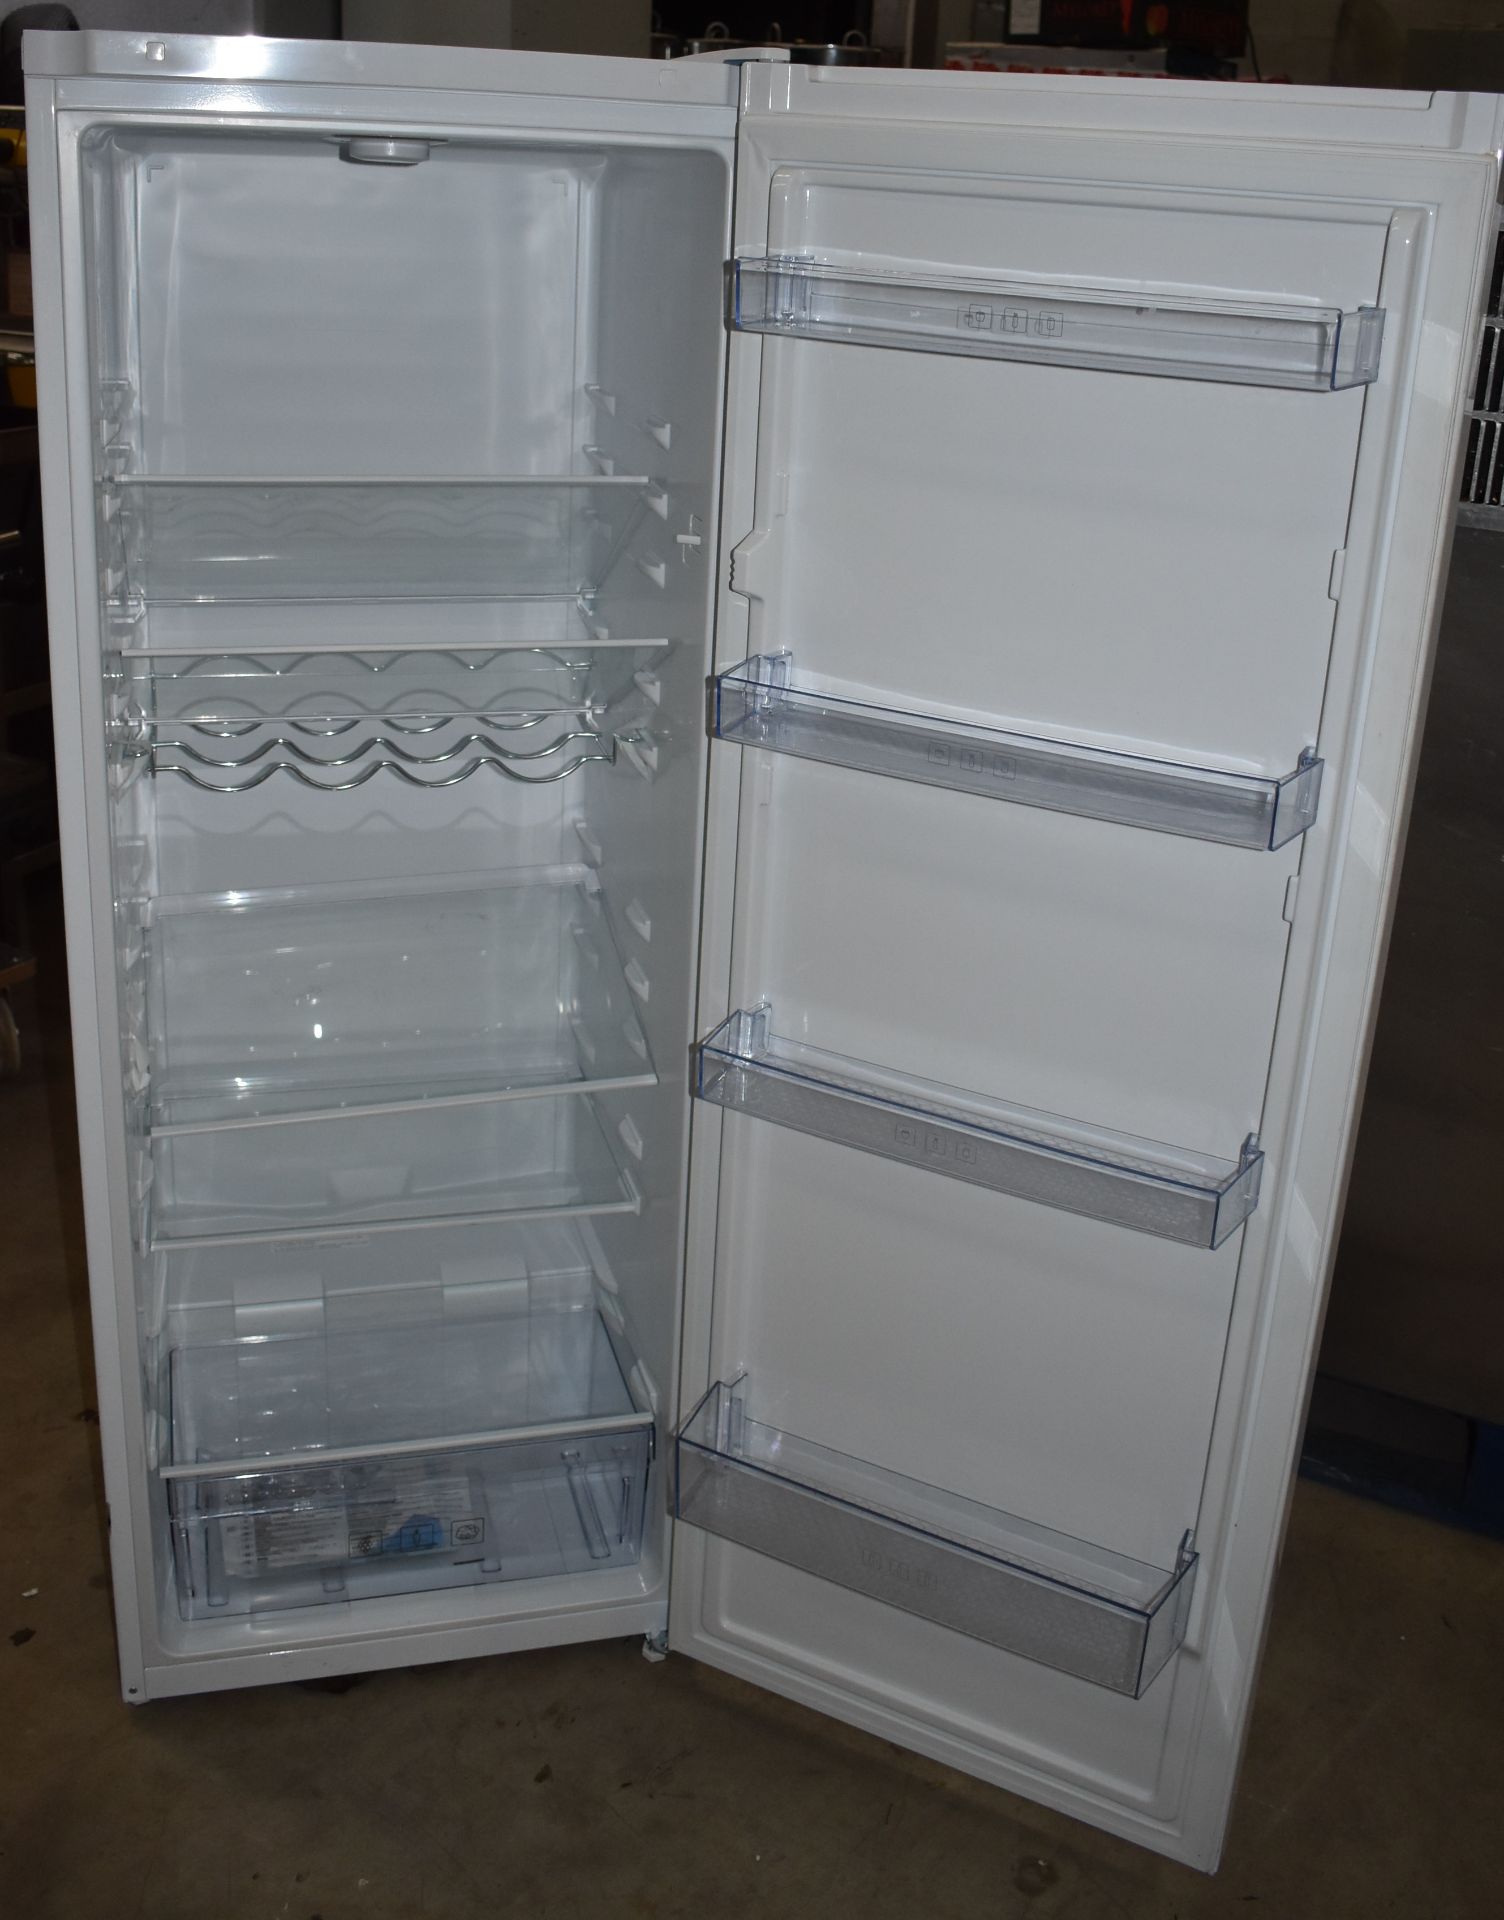 1 x Beko LSG1545W Upright Fridge - Excellent Clean Condition With User Manual and Accessories - - Image 2 of 5